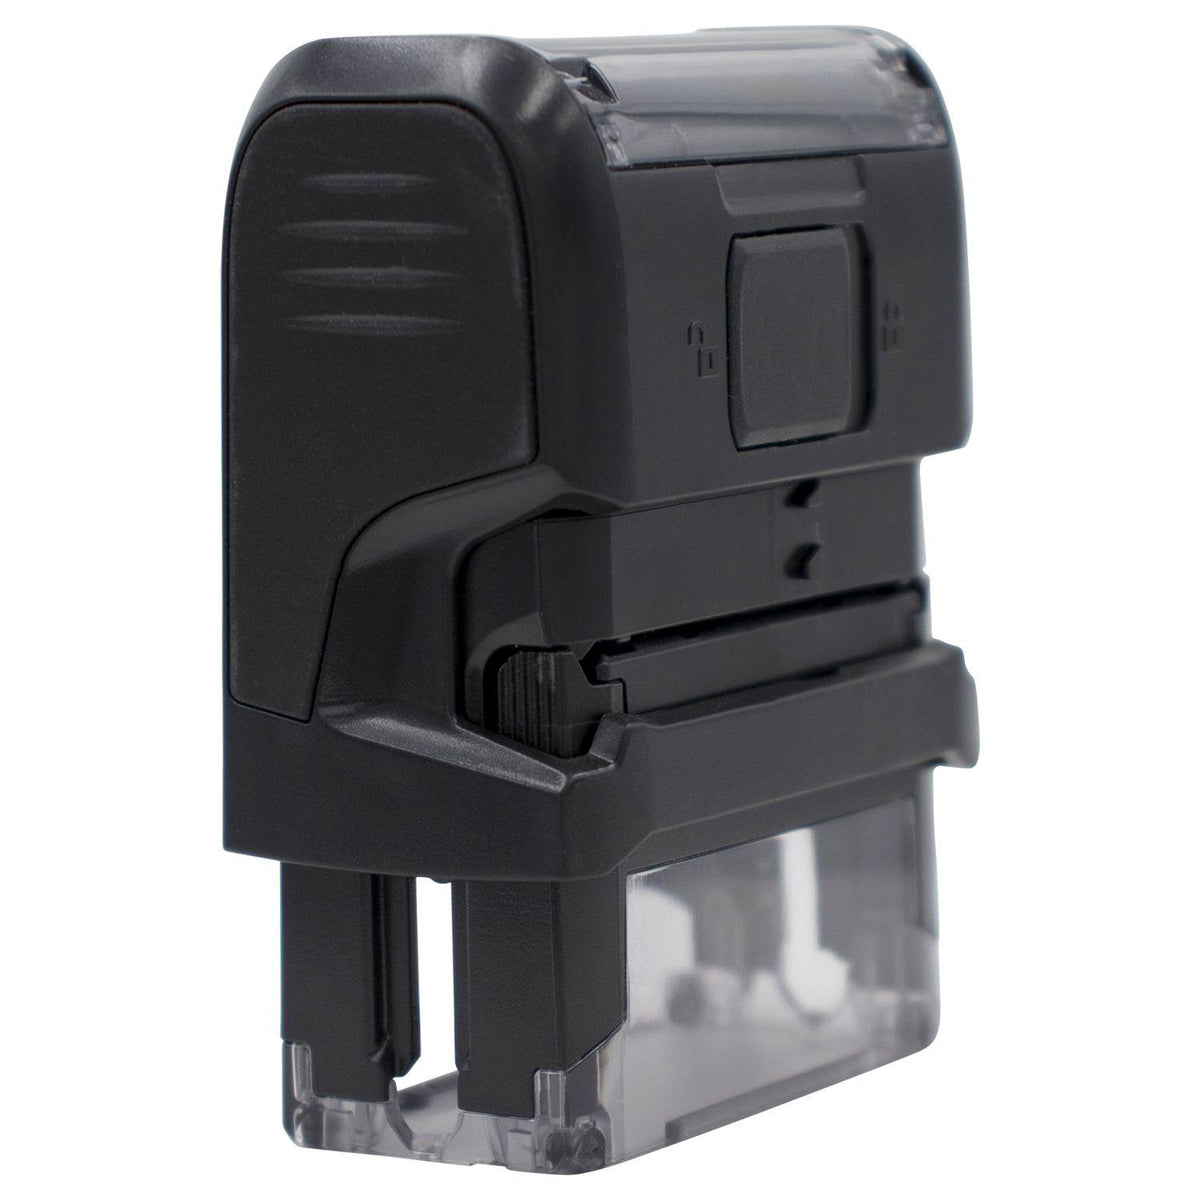 Large Self Inking Co Pay Stamp - Engineer Seal Stamps - Brand_Trodat, Impression Size_Large, Stamp Type_Self-Inking Stamp, Type of Use_Medical Office